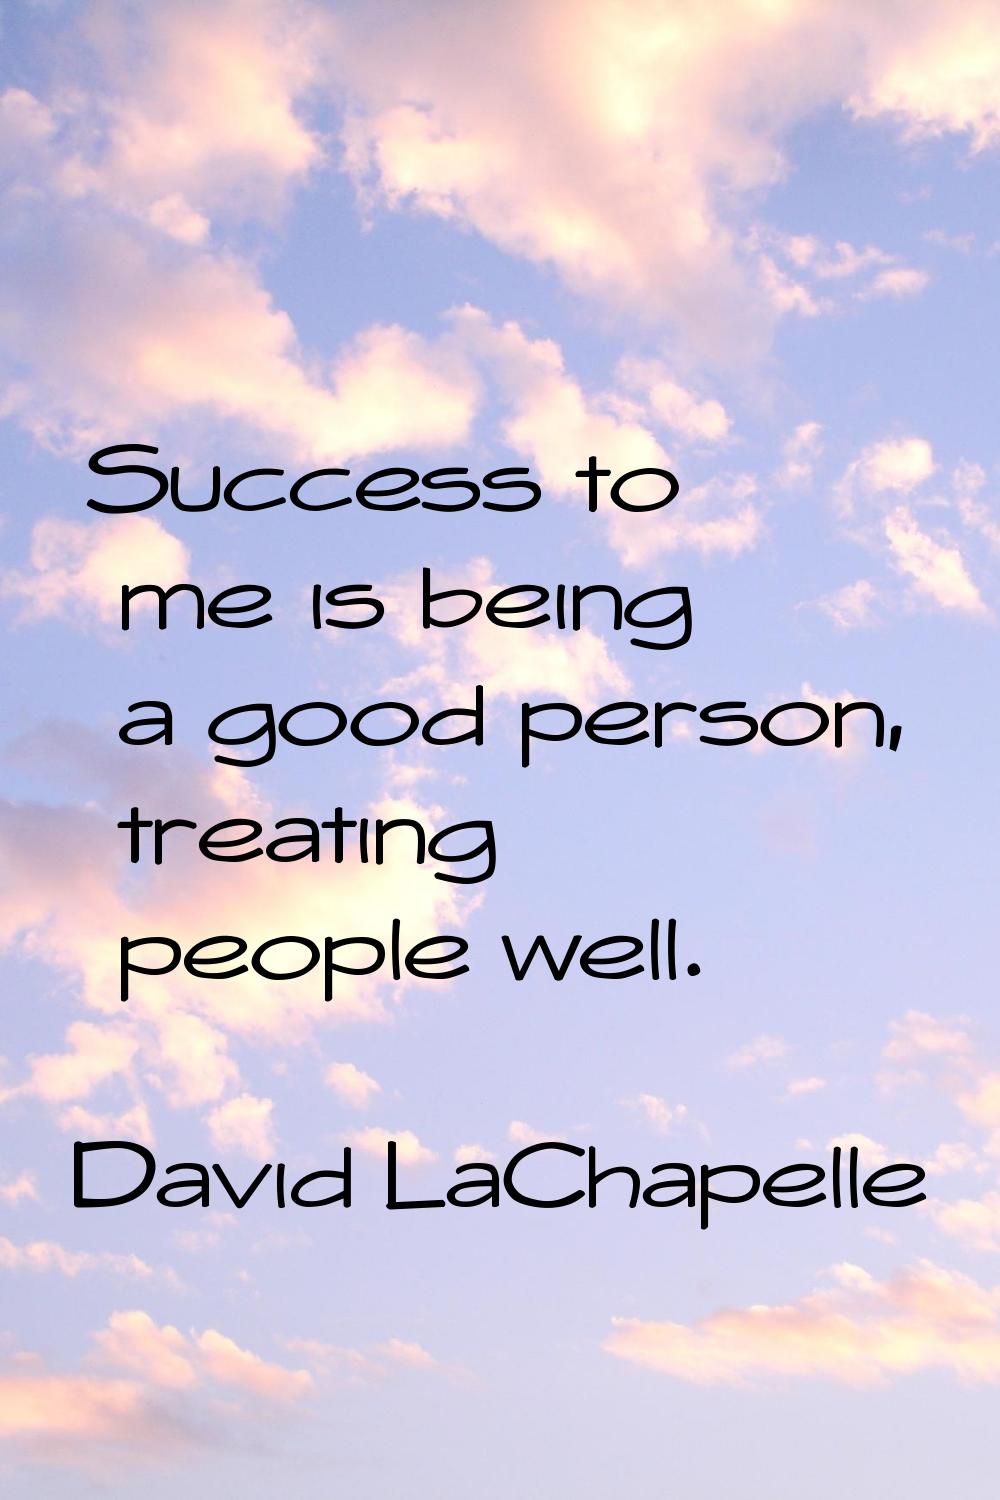 Success to me is being a good person, treating people well.